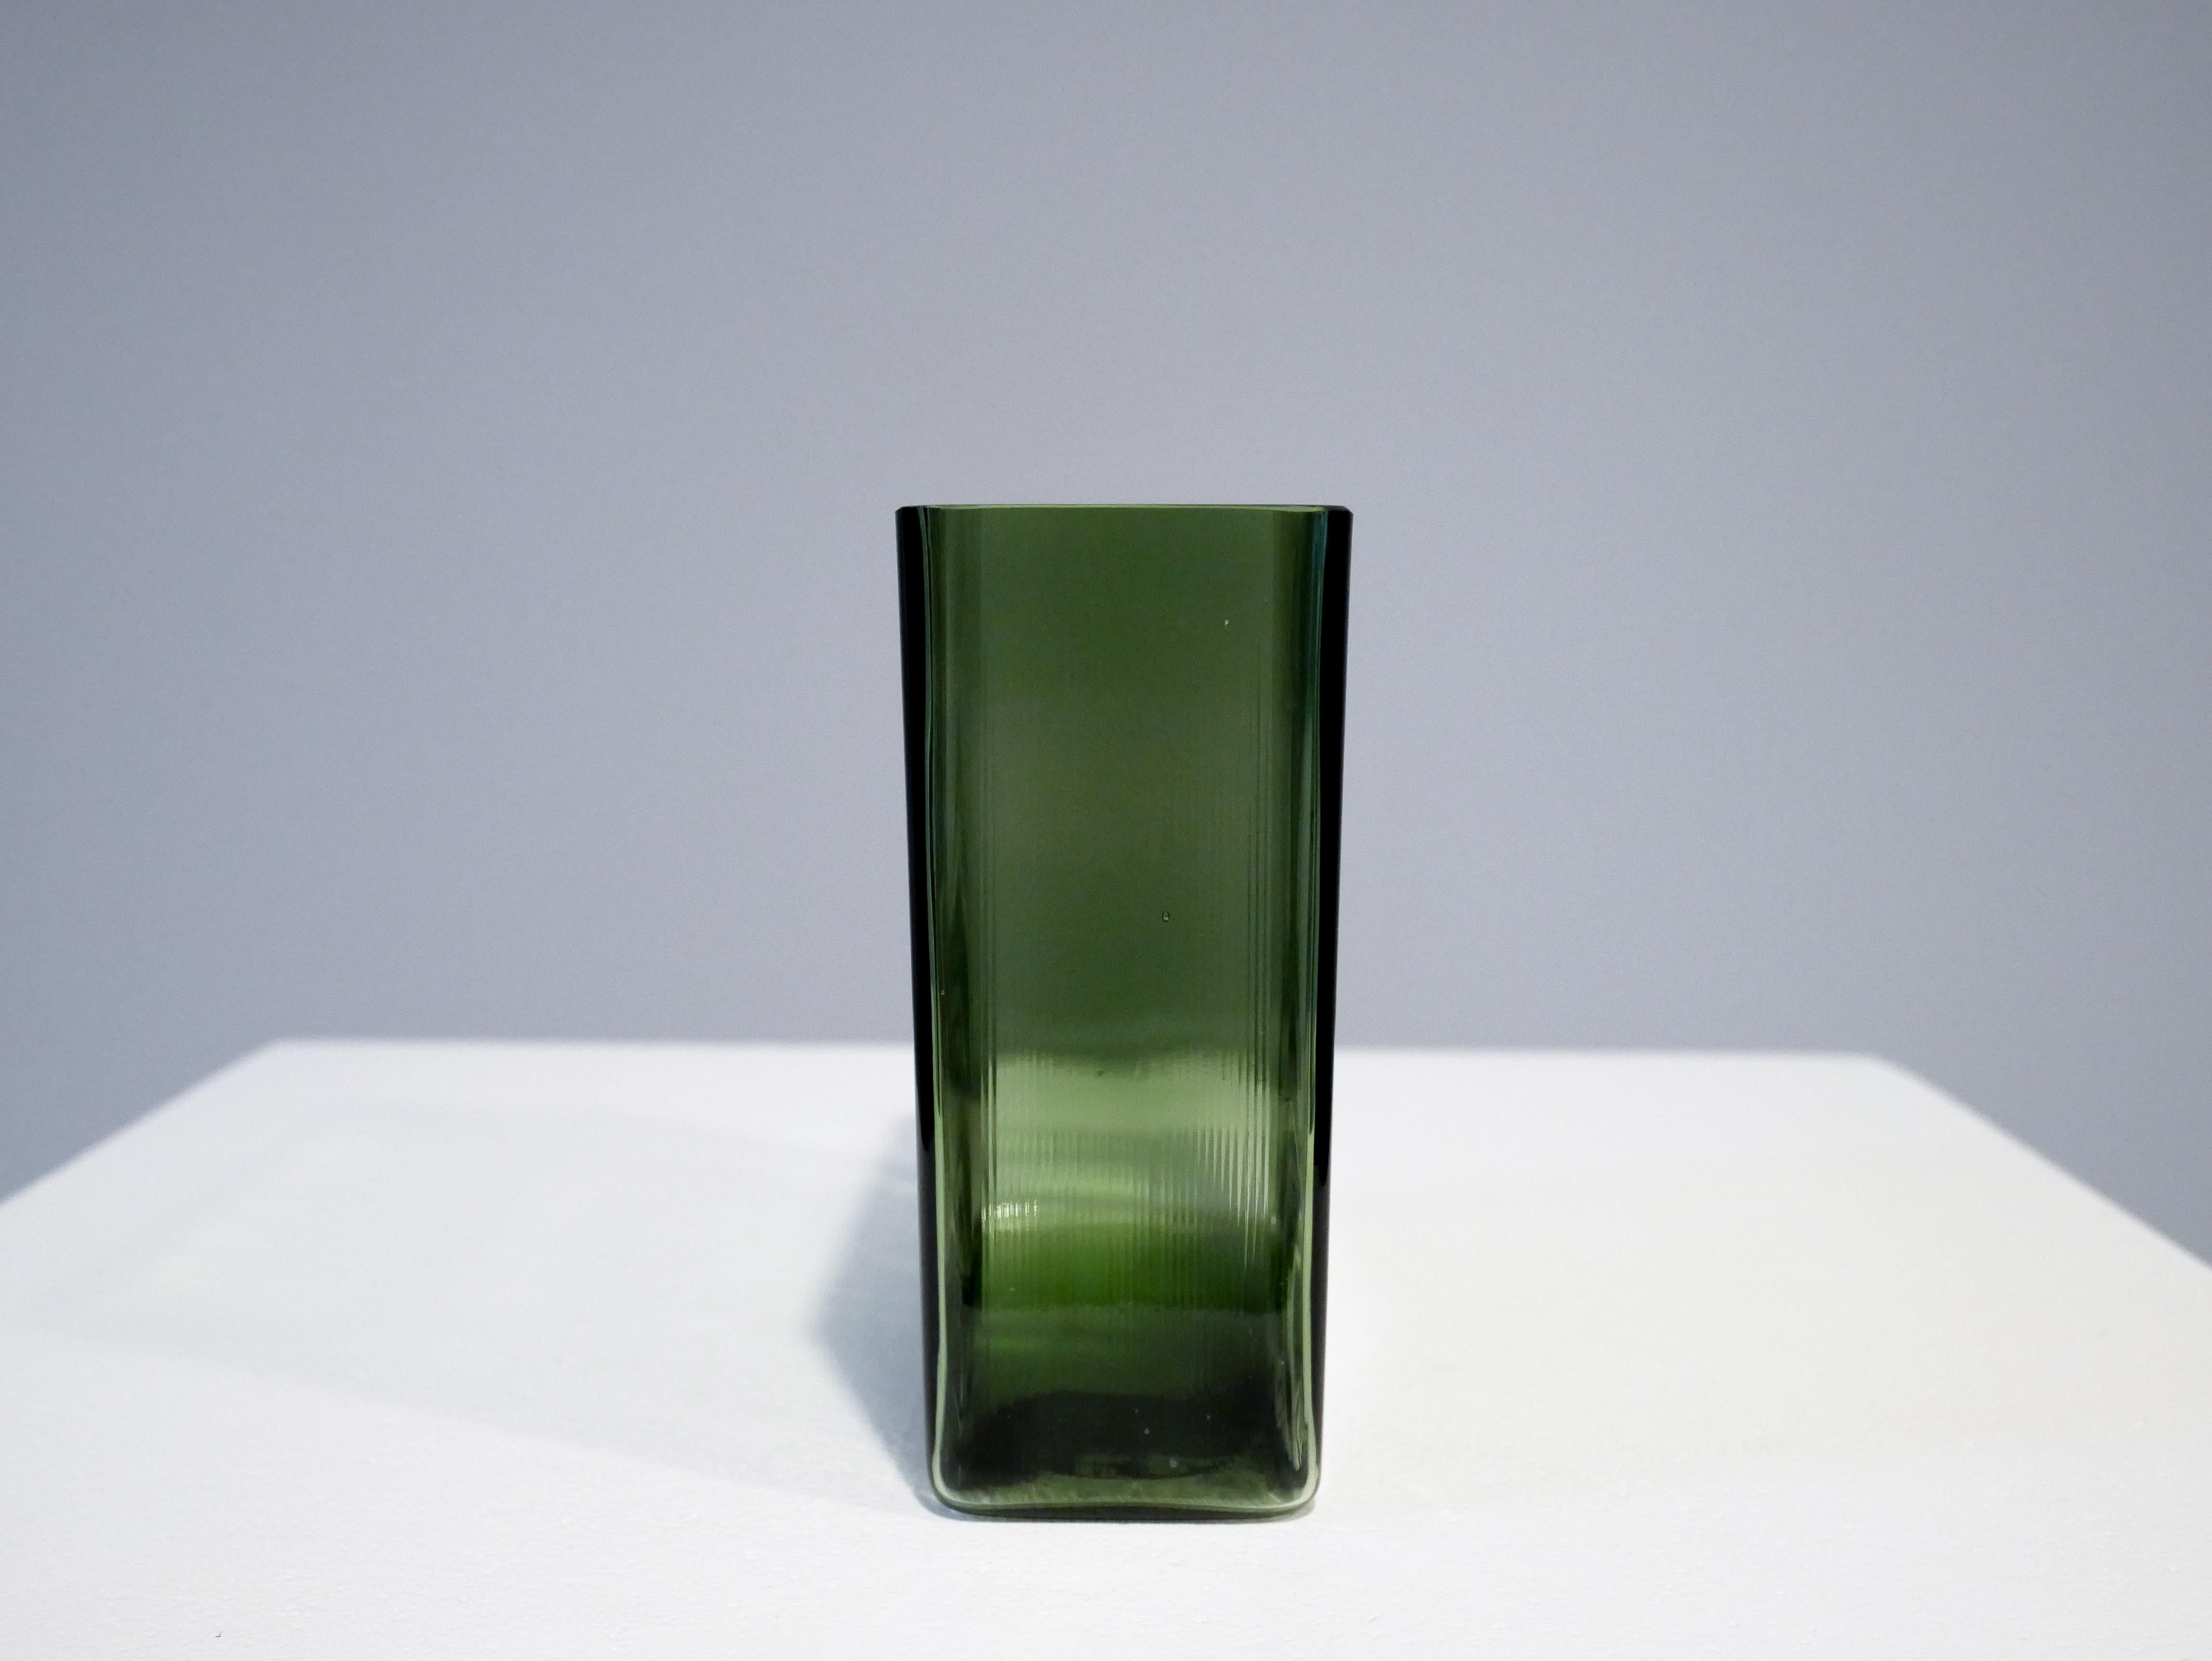 Mid-Century Modern Lennart Andersson Vases Model Isi, Produced by Gullaskruf in Sweden, 1950s For Sale